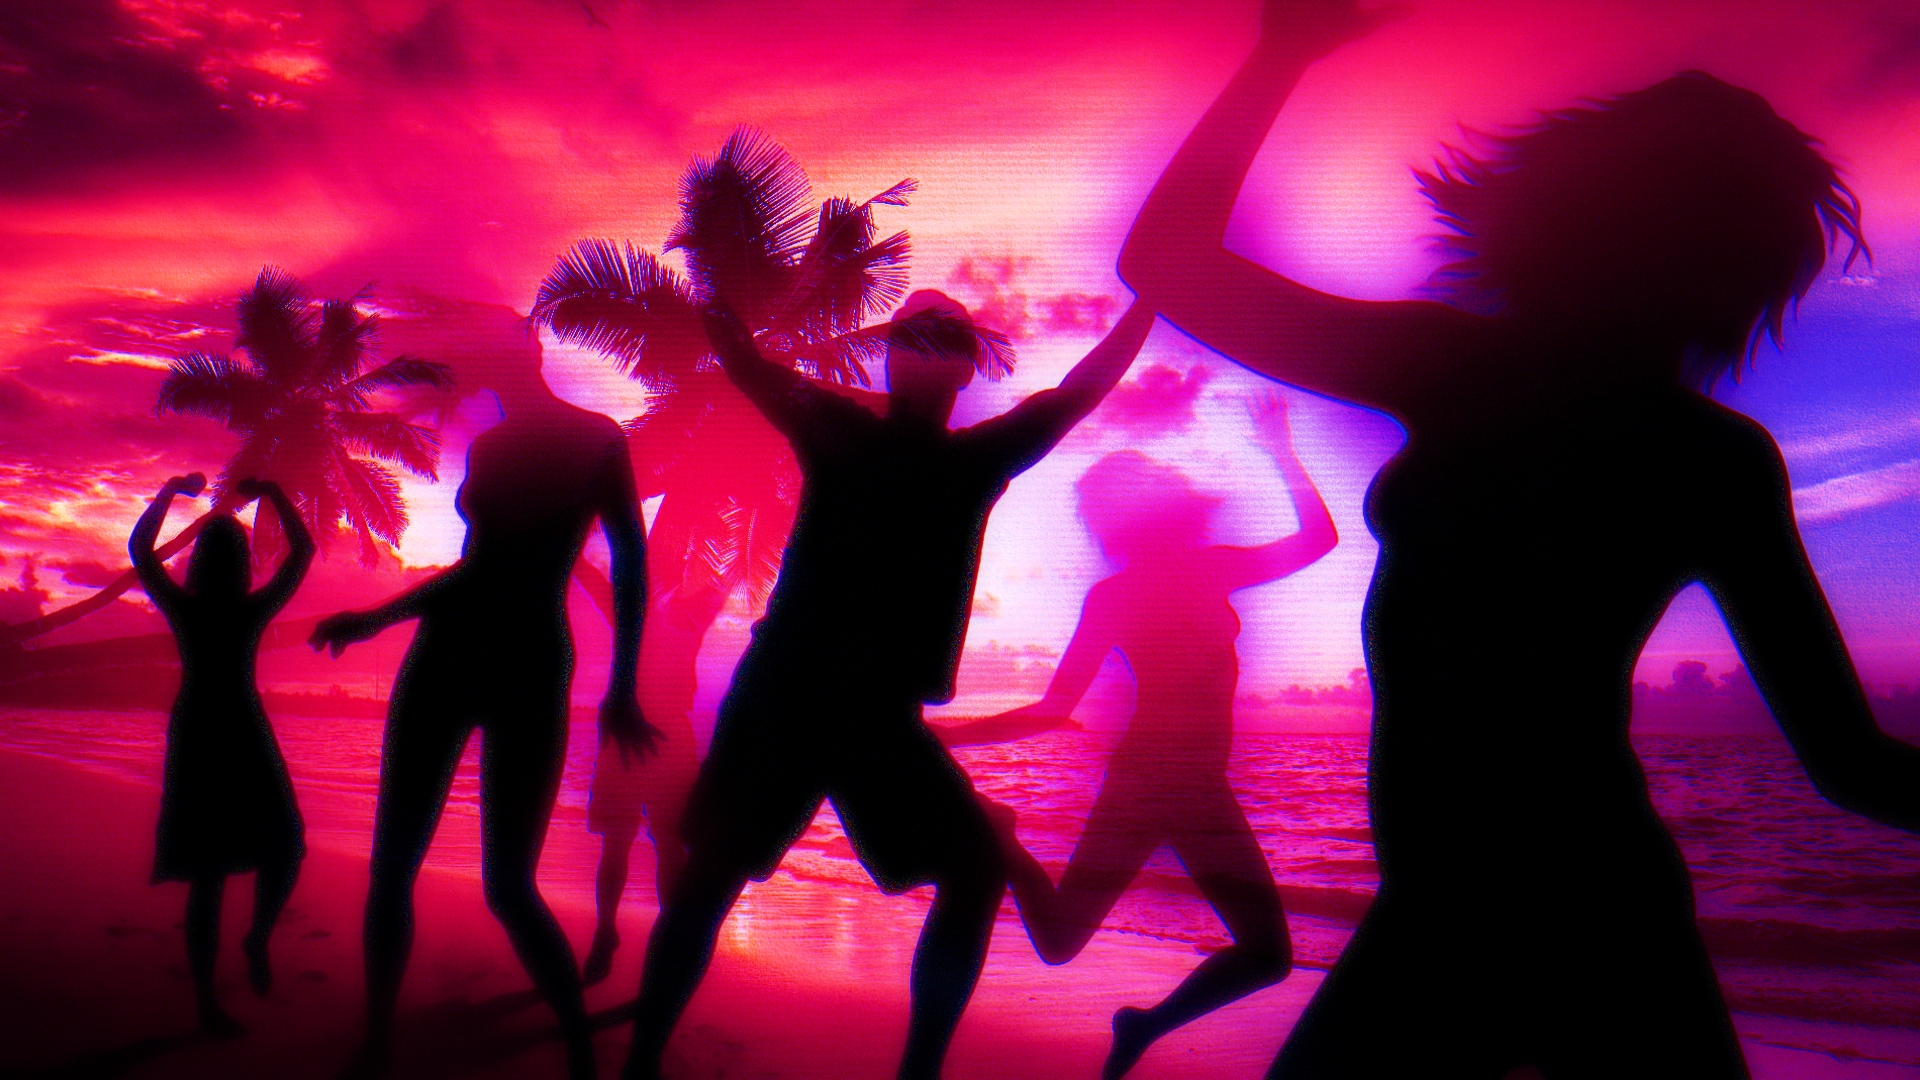 beach party wallpaper,people in nature,dance,purple,performing arts,dancer